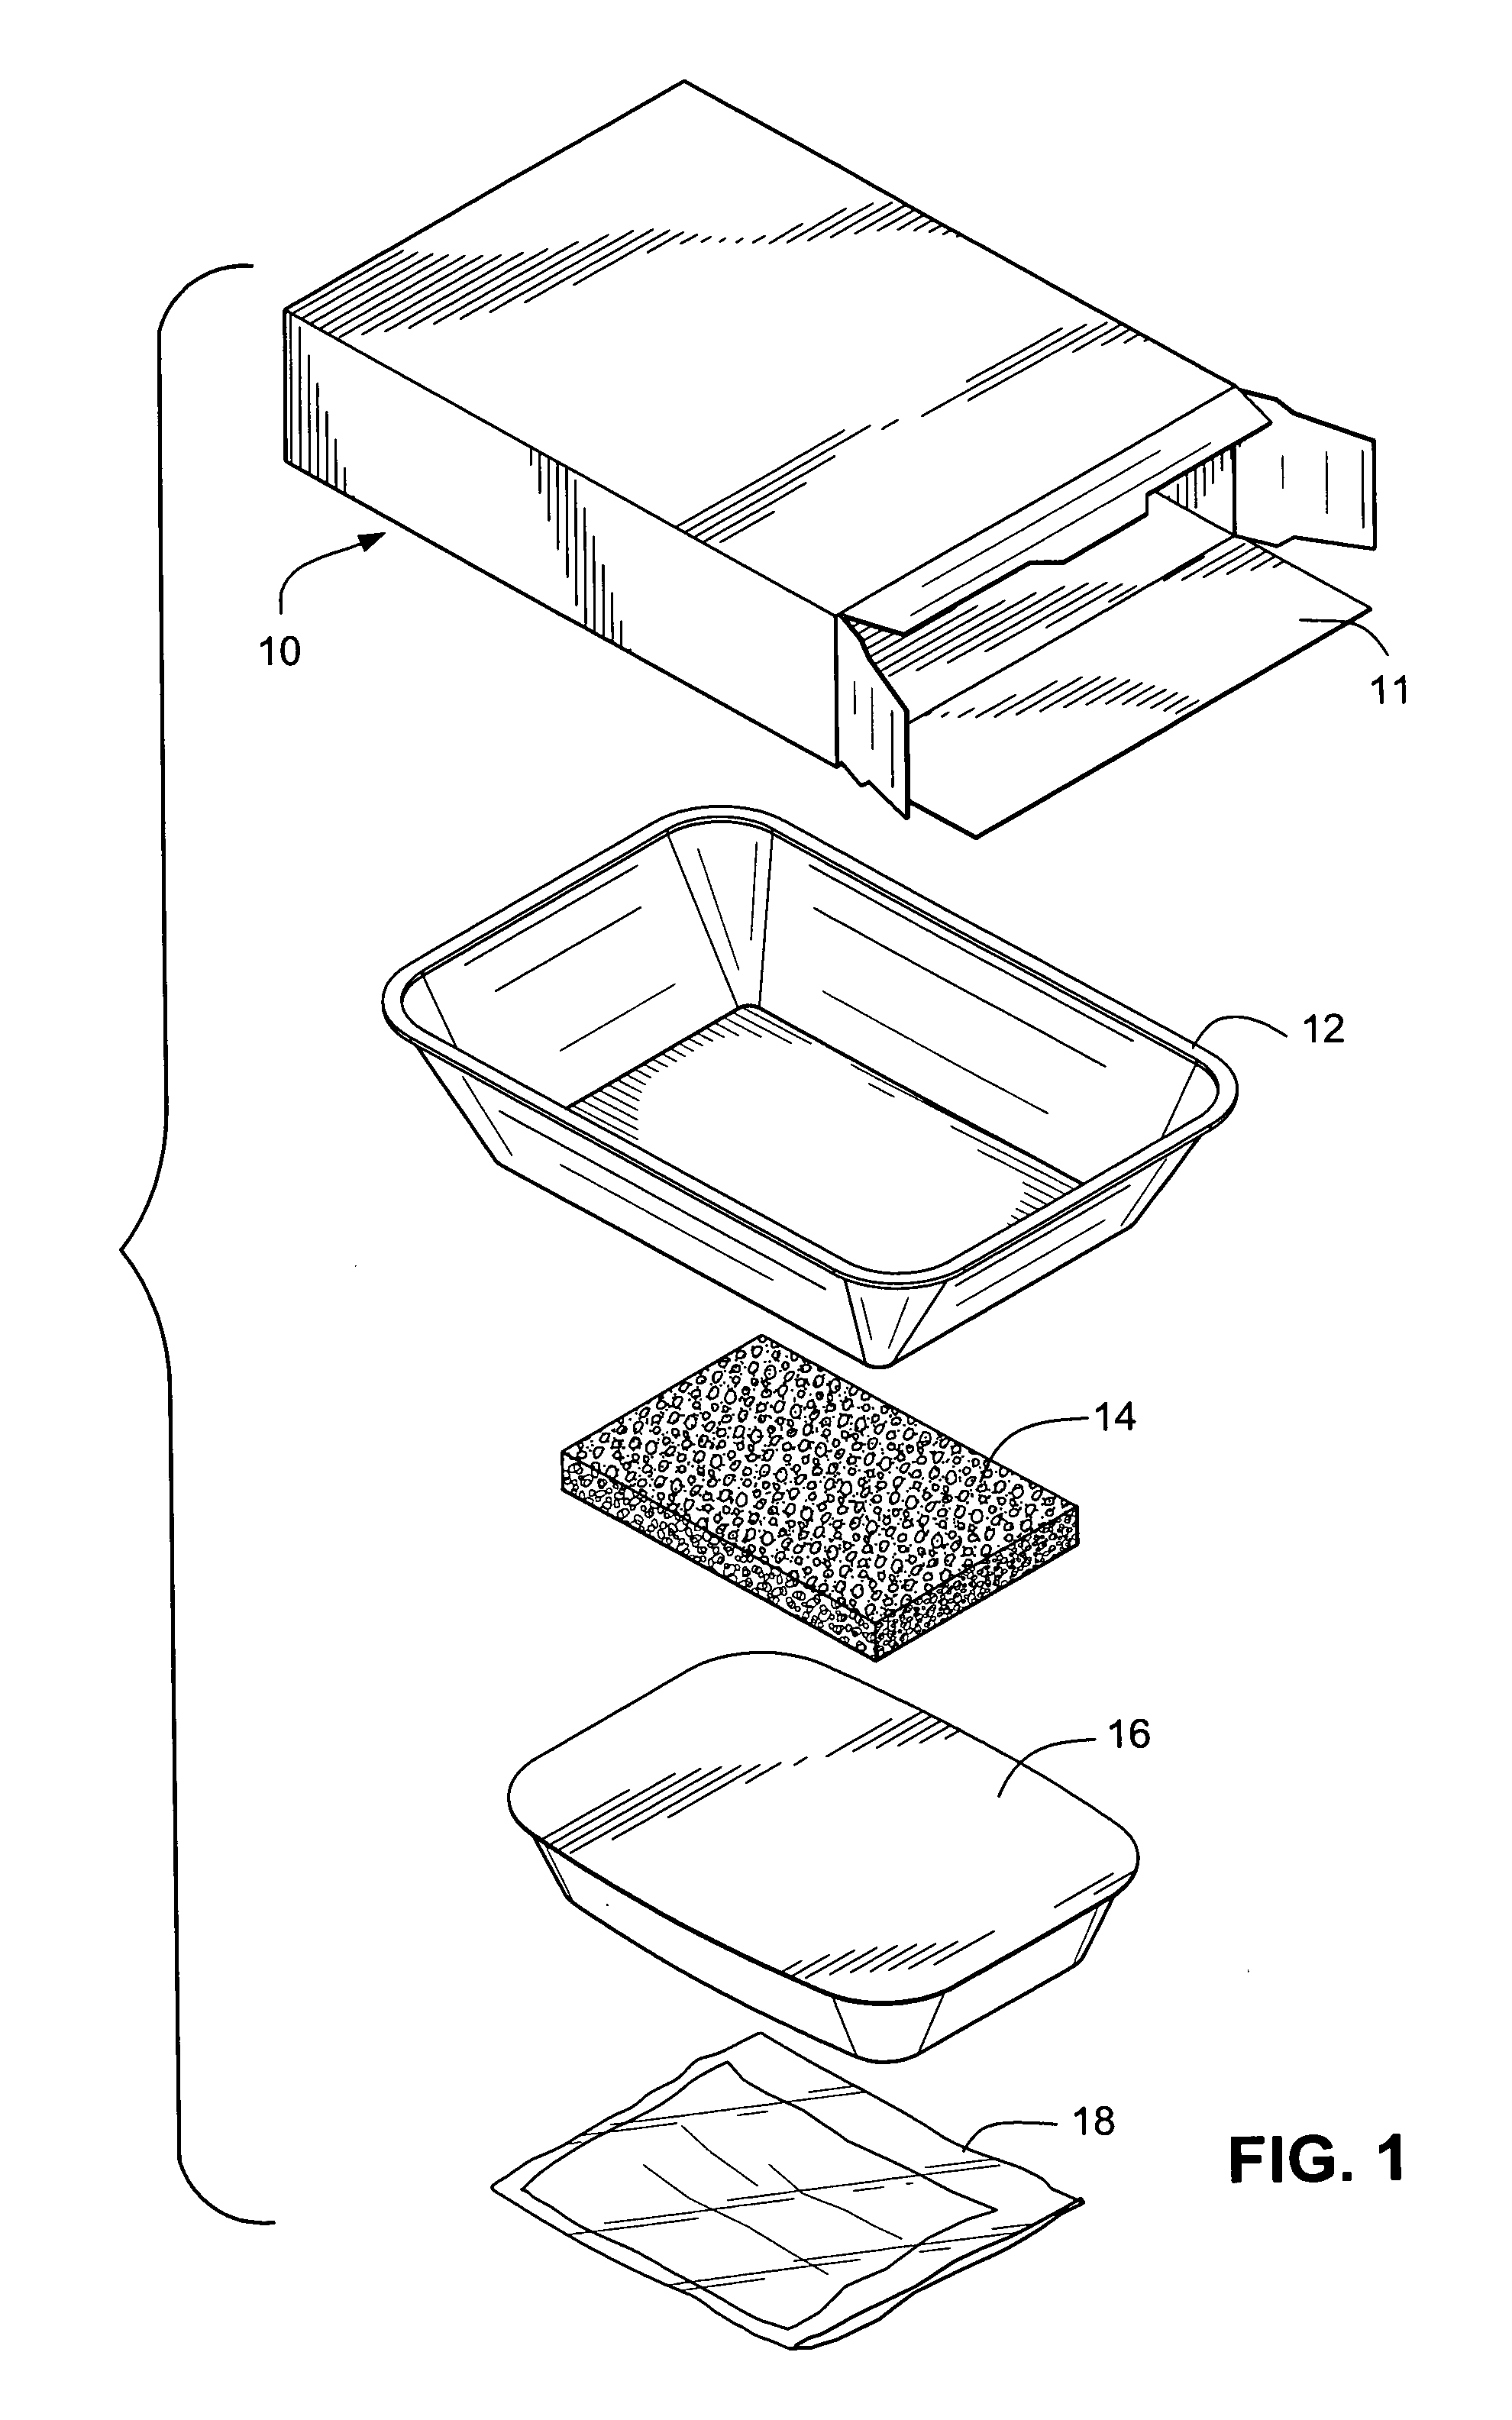 Self-contained and self-heating food, meal and drink package